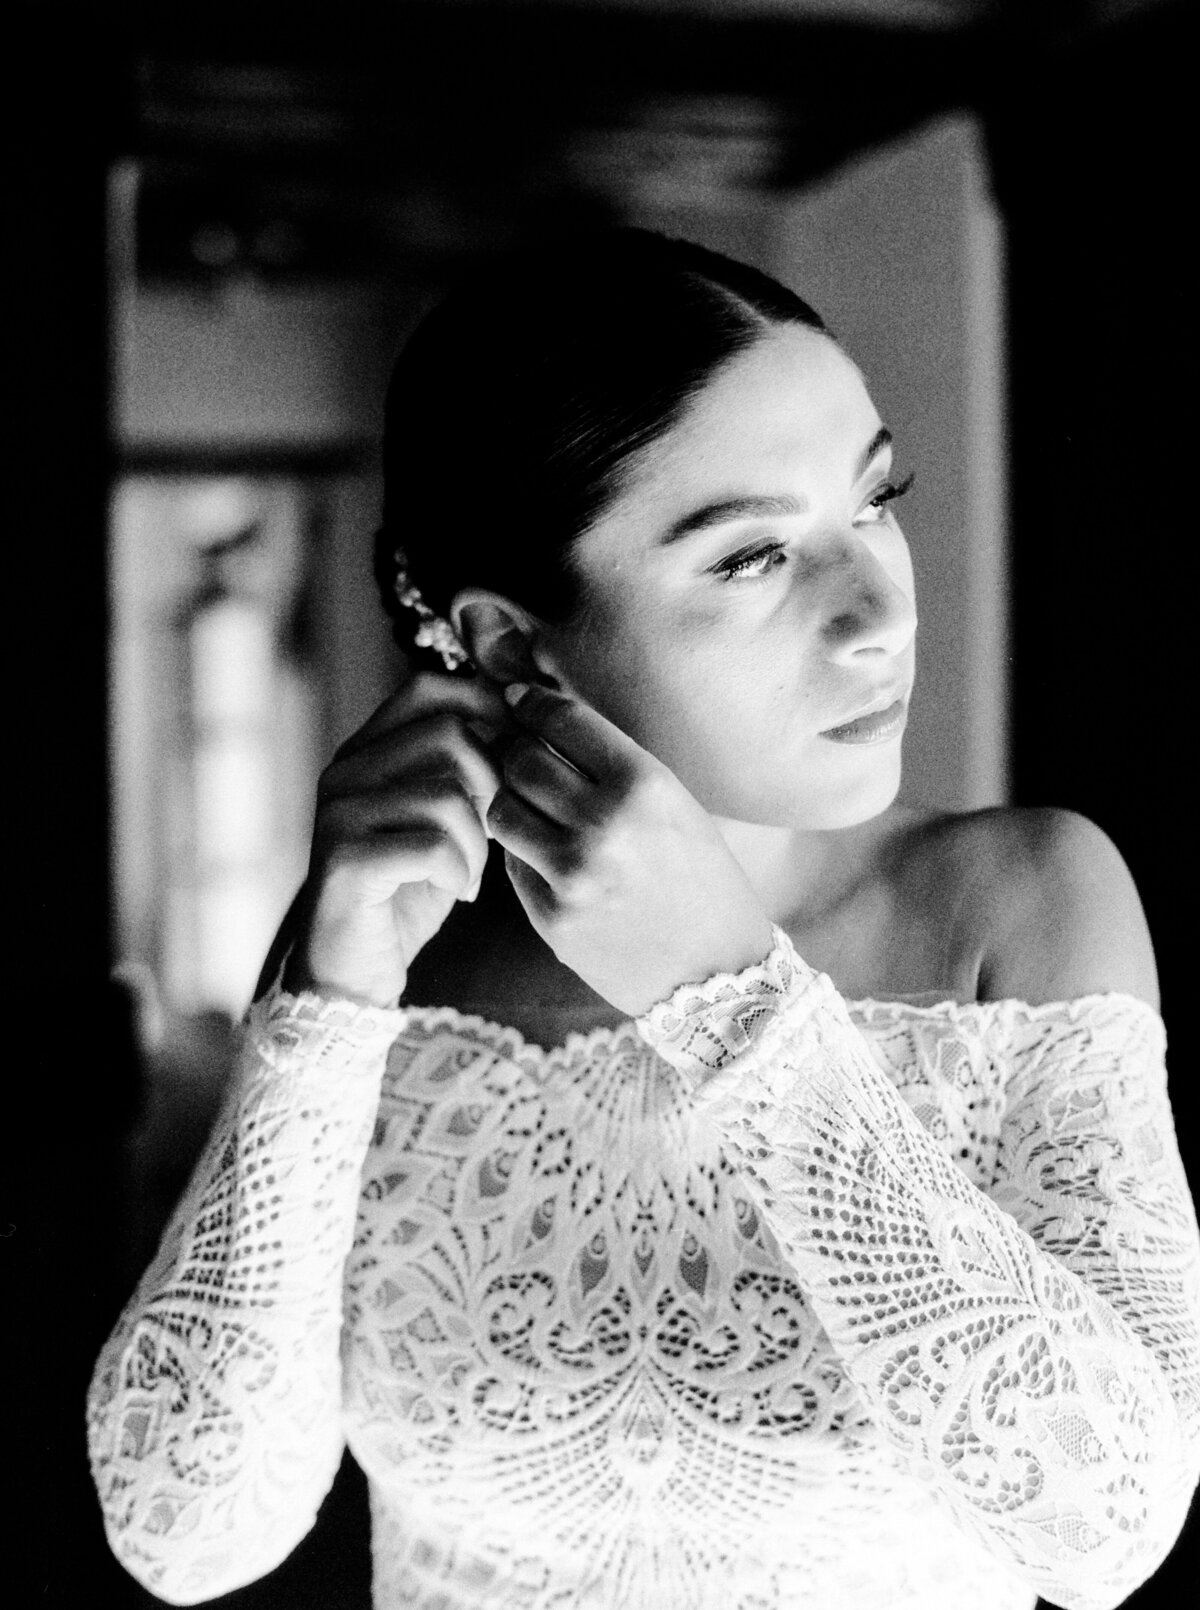 Black and white film photograph of bride in all lace wedding dress putting her pearl earring in photographed by Italy wedding photographer at Villa Montanare Tuscany wedding